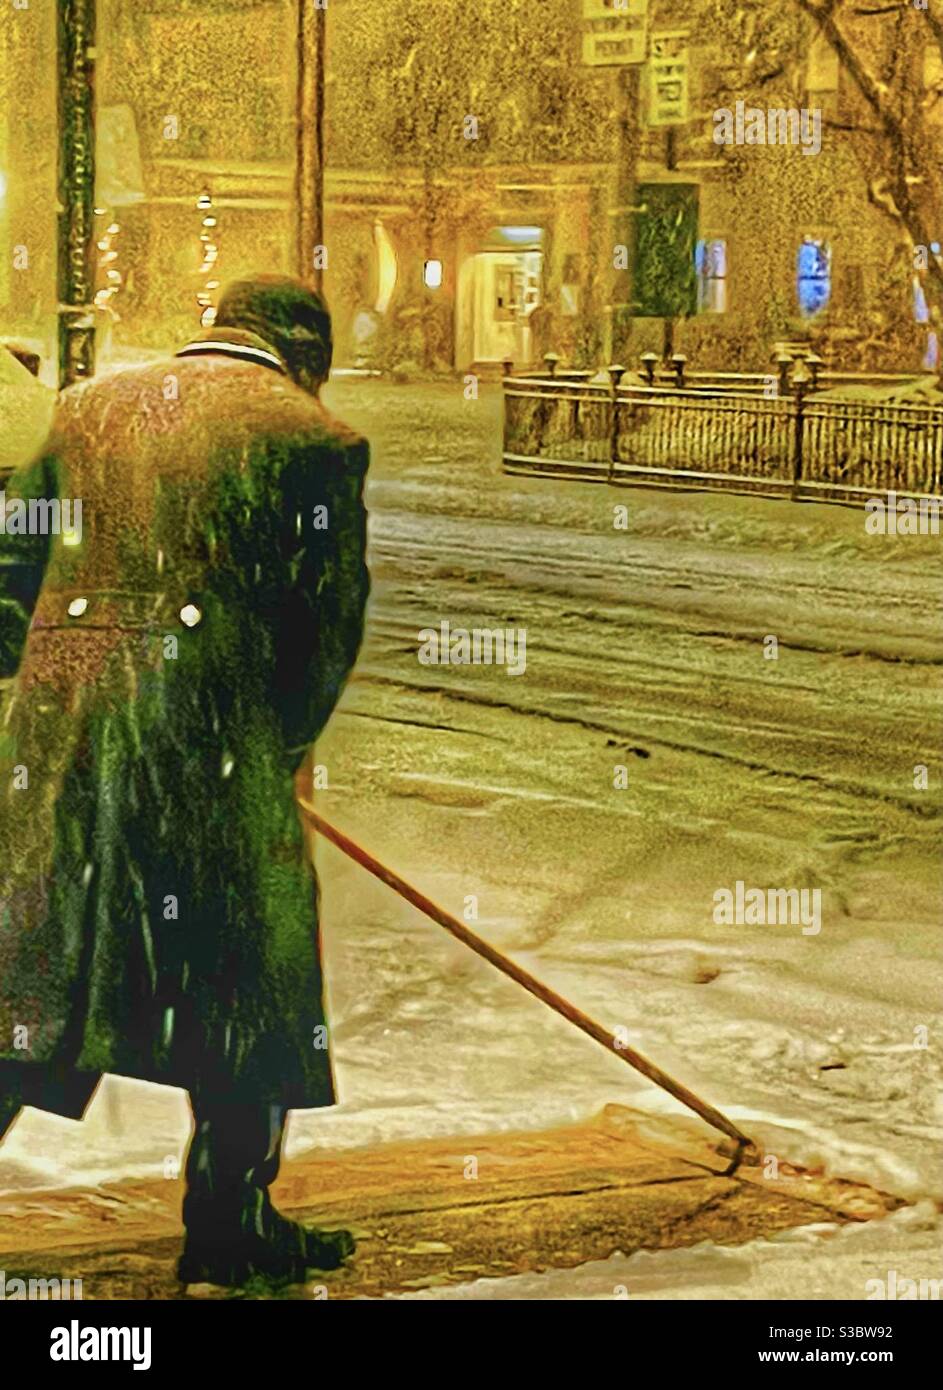 The night  doorman at 30 Park Avenue in New York City clears the sidewalk of slippery snow during a snowstorm. Stock Photo